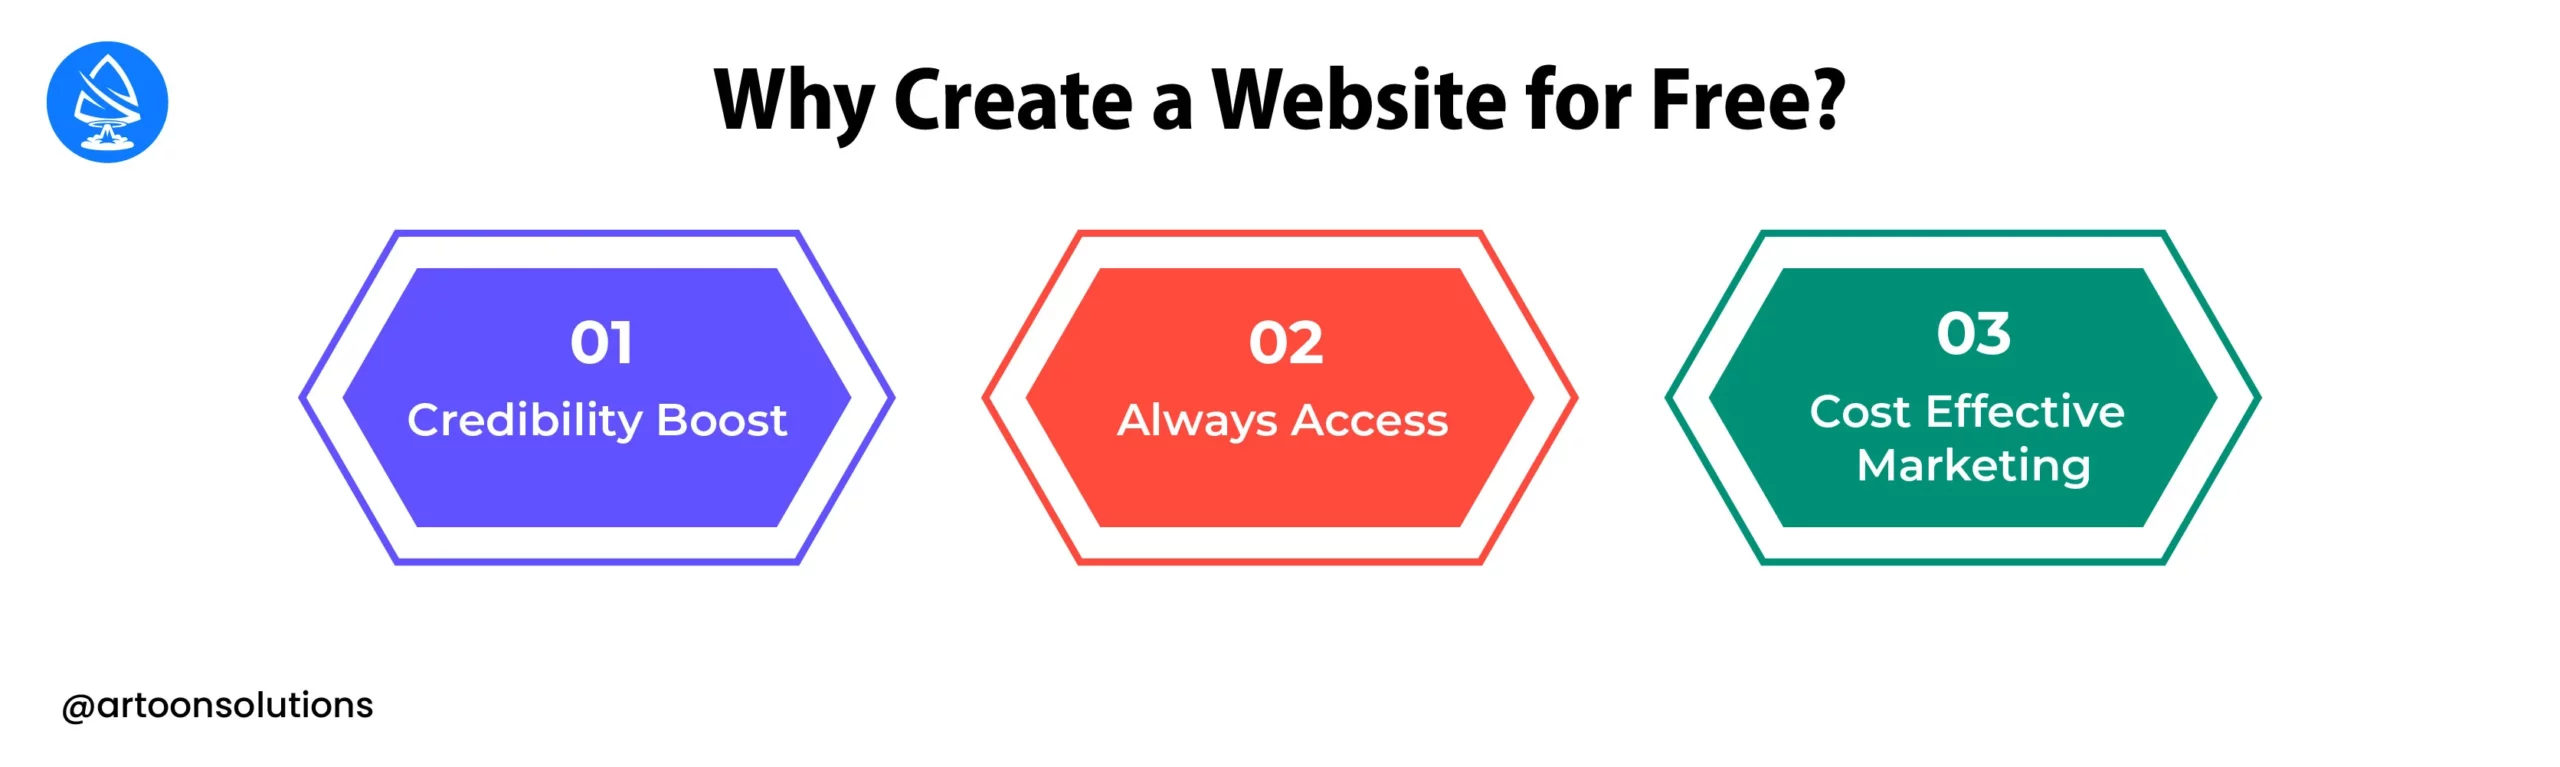 Why Create a Website for Free?